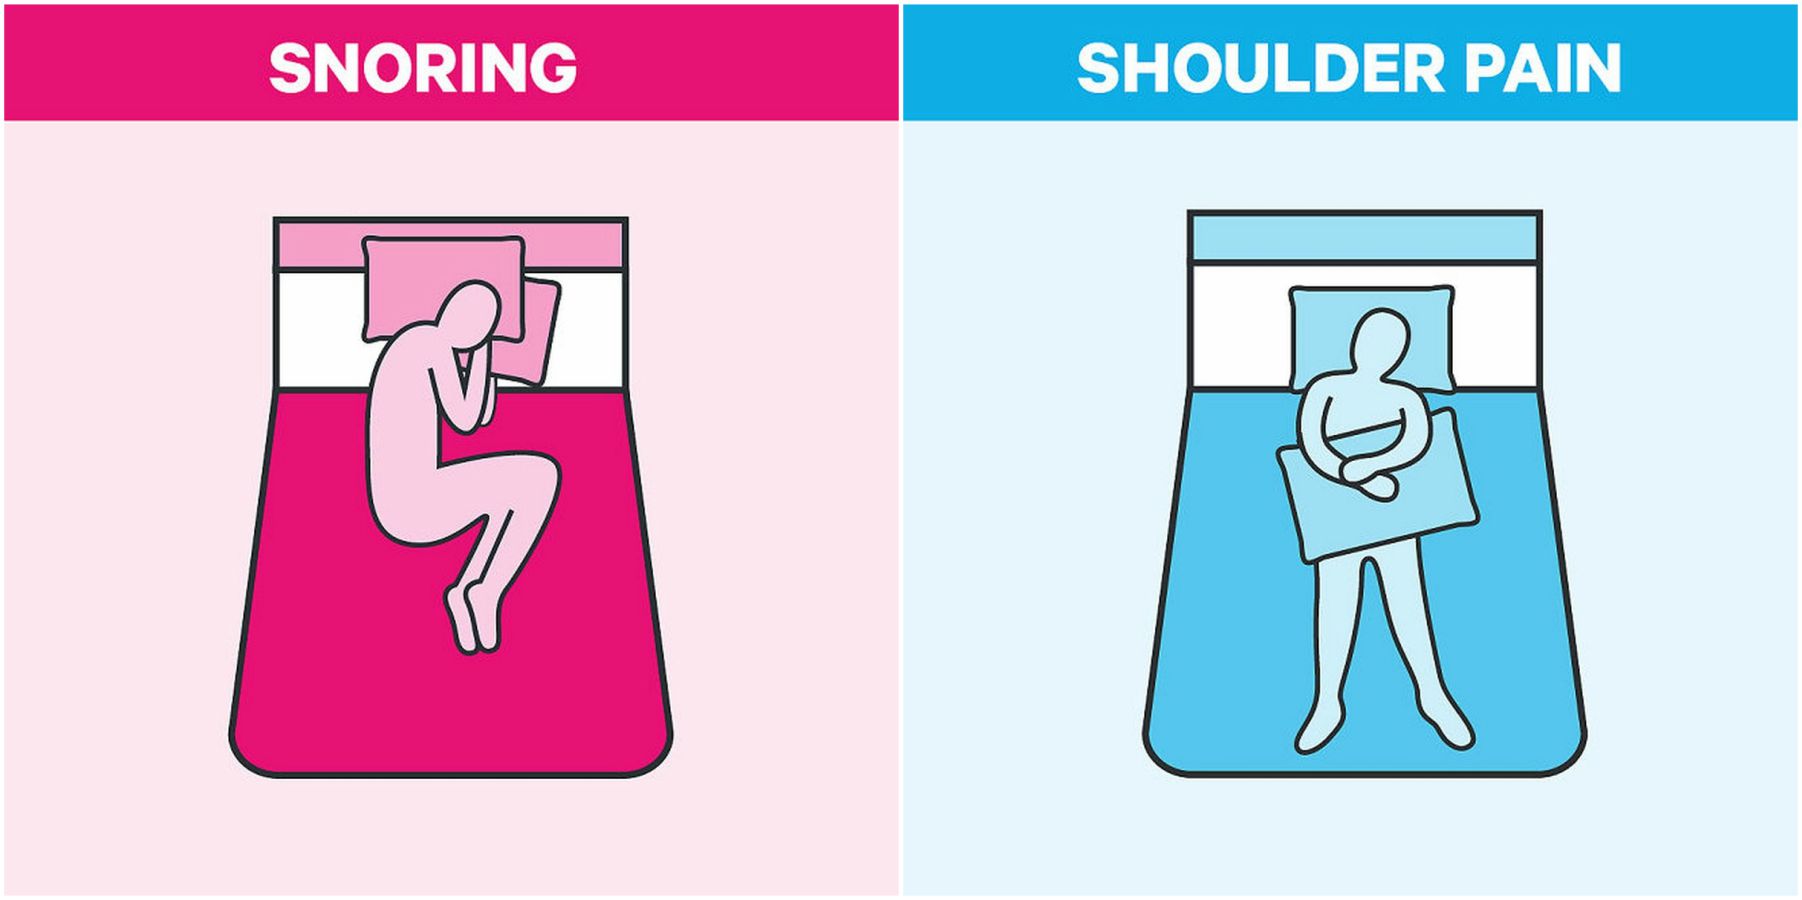 How to Avoid 9 Common Sleeping Problems and Get a Good Night’s Sleep